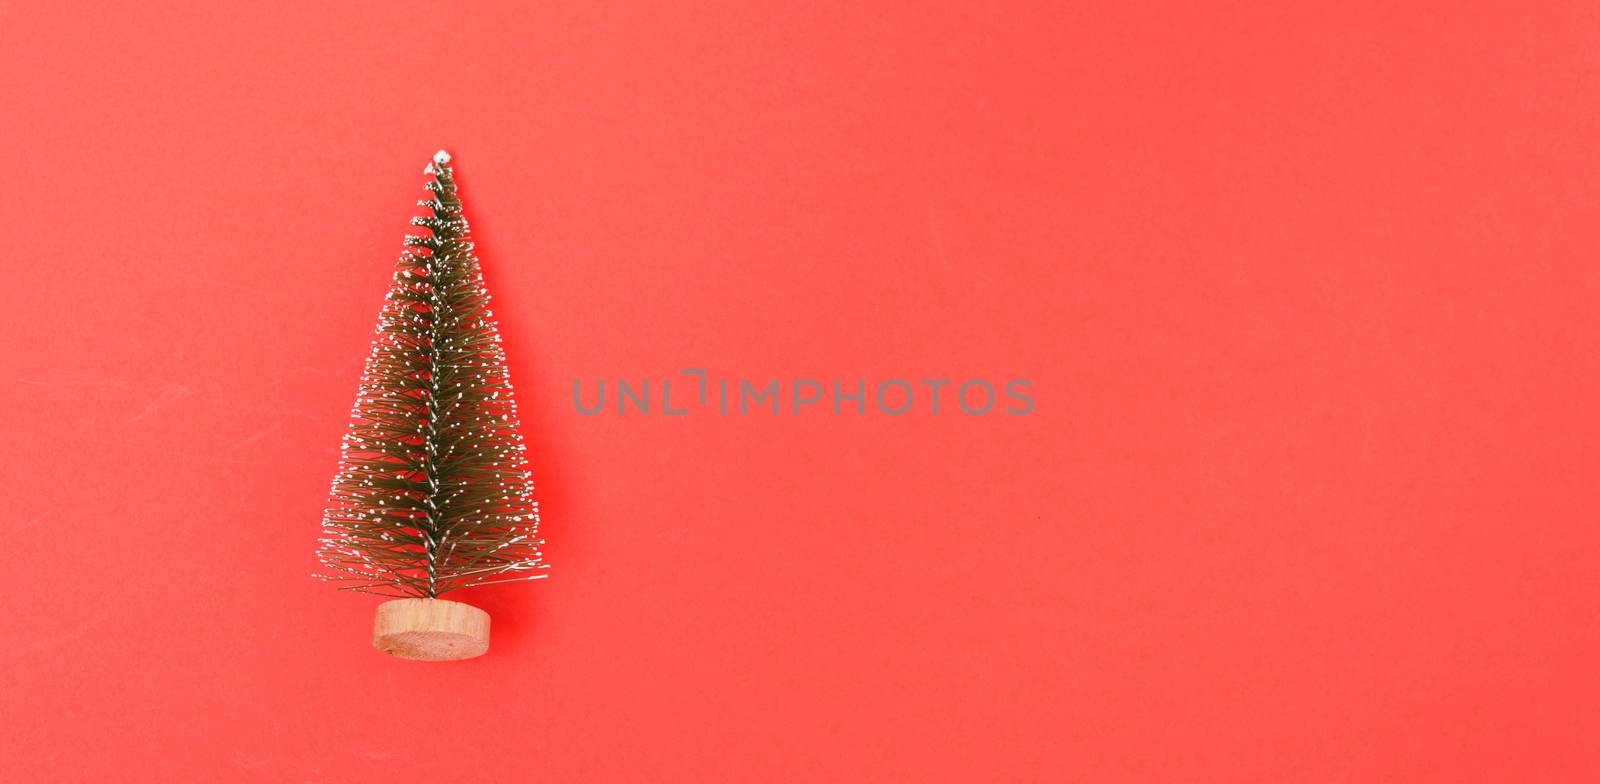 Christmas holiday theme with small Christmas trees decorated on red background. Merry Christmas concept. With Copy space for text